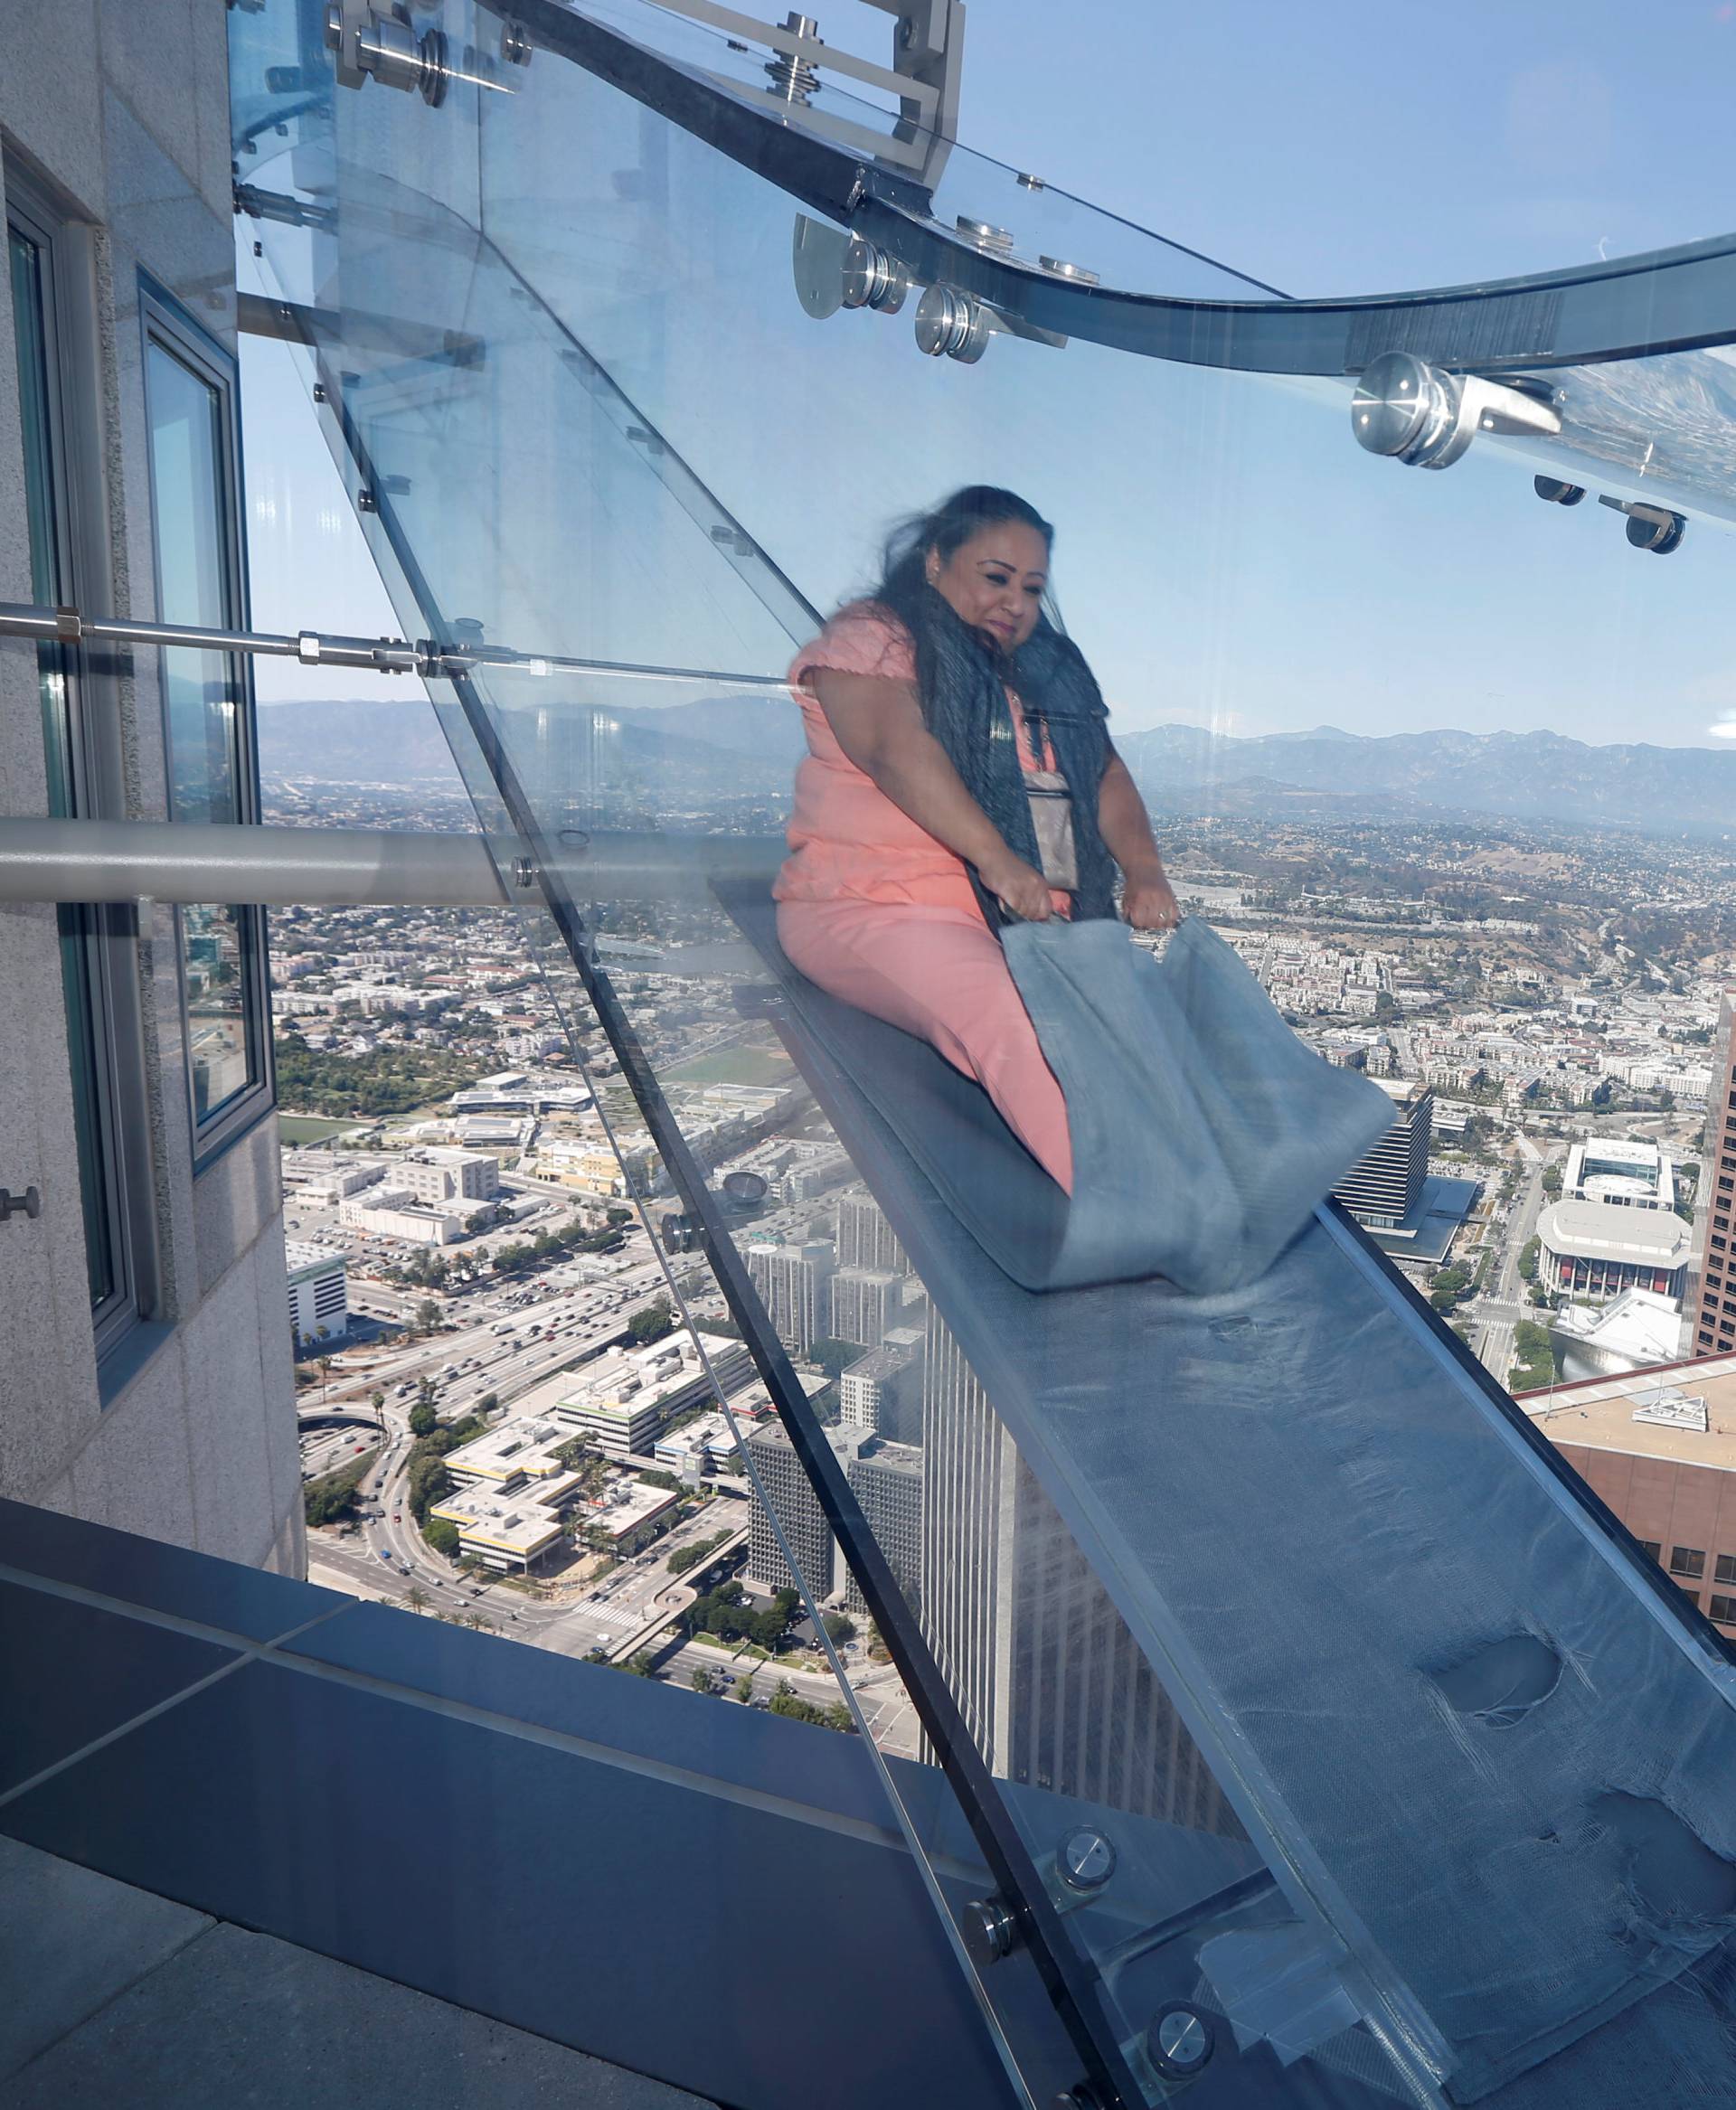 Patricia Rodriguez, 49, rides the Skyslide on the 69th and 70th floors of the U.S. Bank Tower which is attached to the OUE Skyspace LA observation deck in downtown Los Angeles